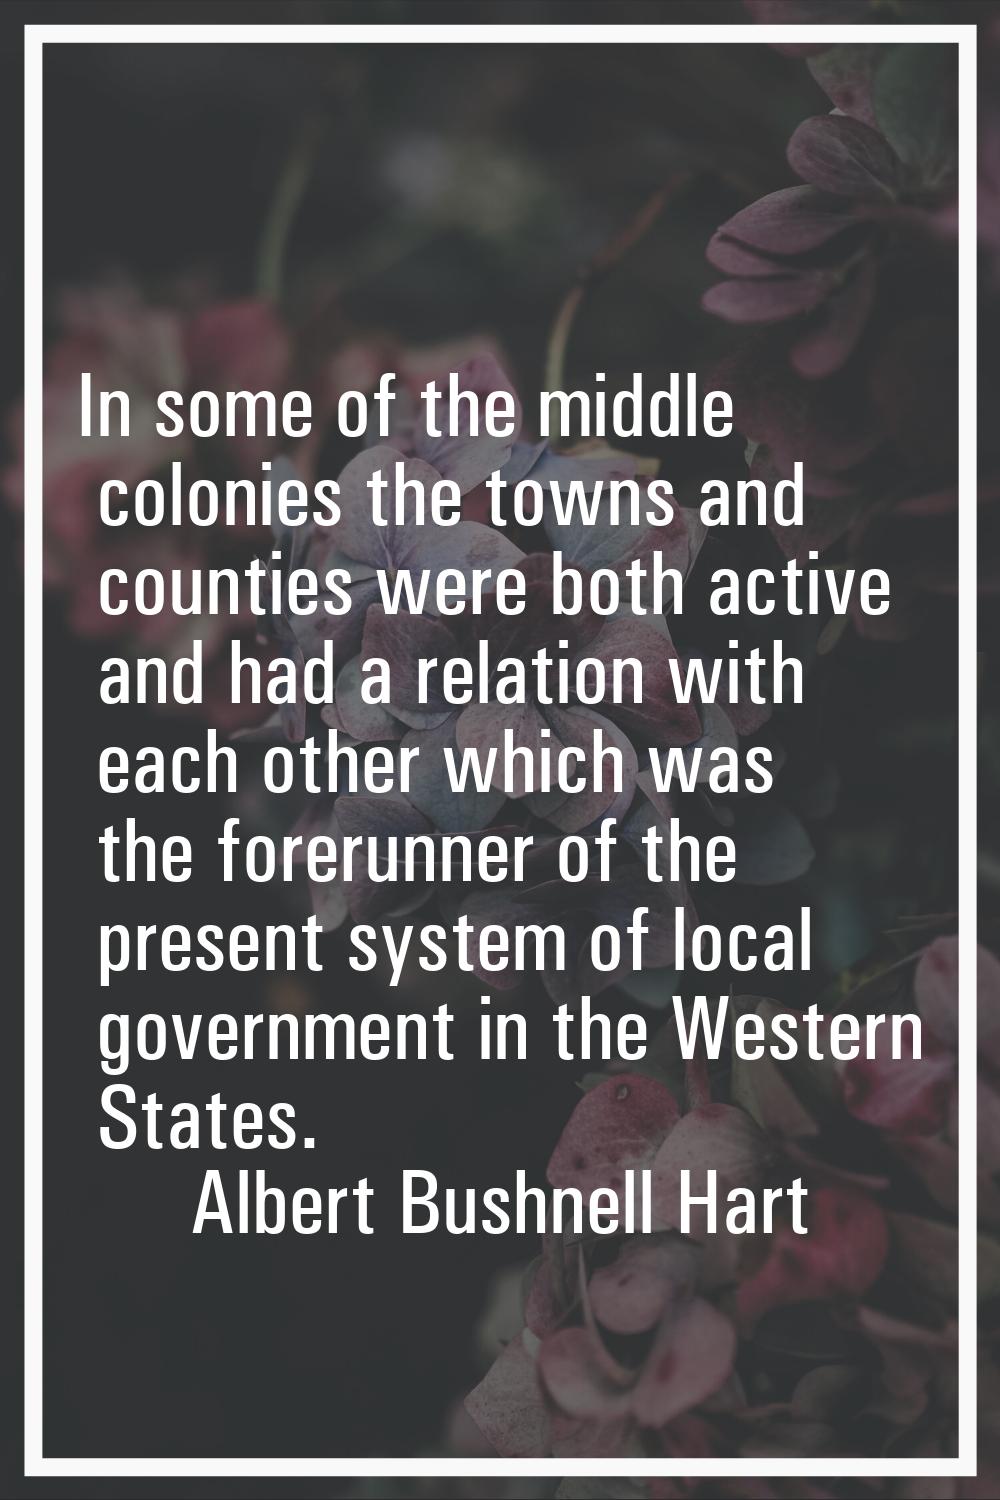 In some of the middle colonies the towns and counties were both active and had a relation with each